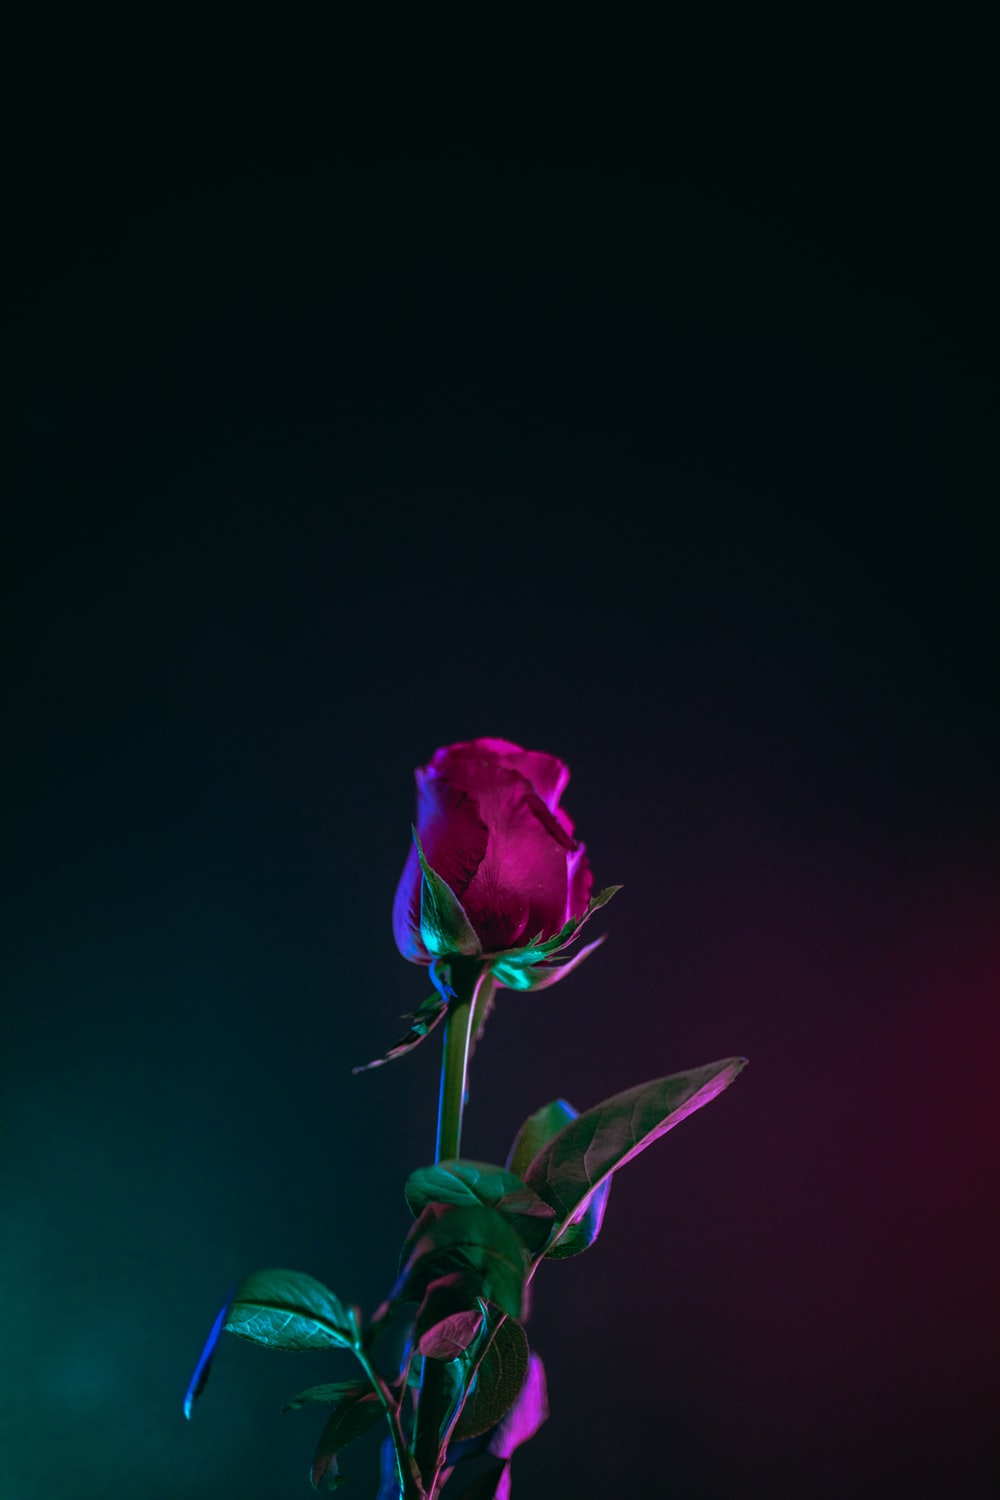 Rose Pictures HD Image Stock Photos